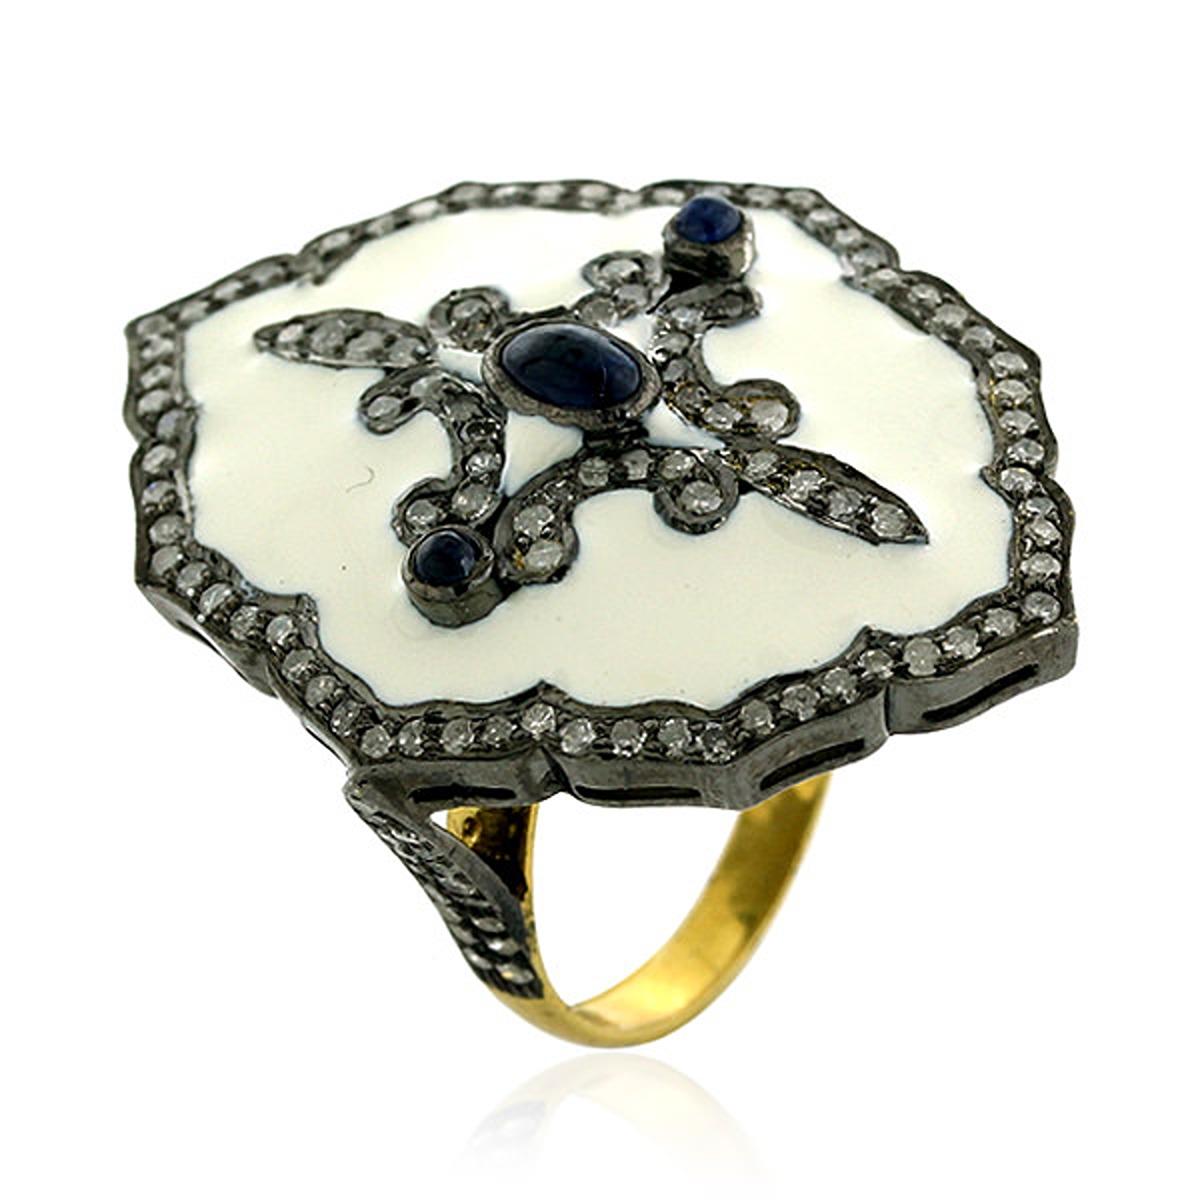 Mixed Cut Pave Diamond Enamel Ring With Blue Sapphire Made In 18k Gold & Silver For Sale